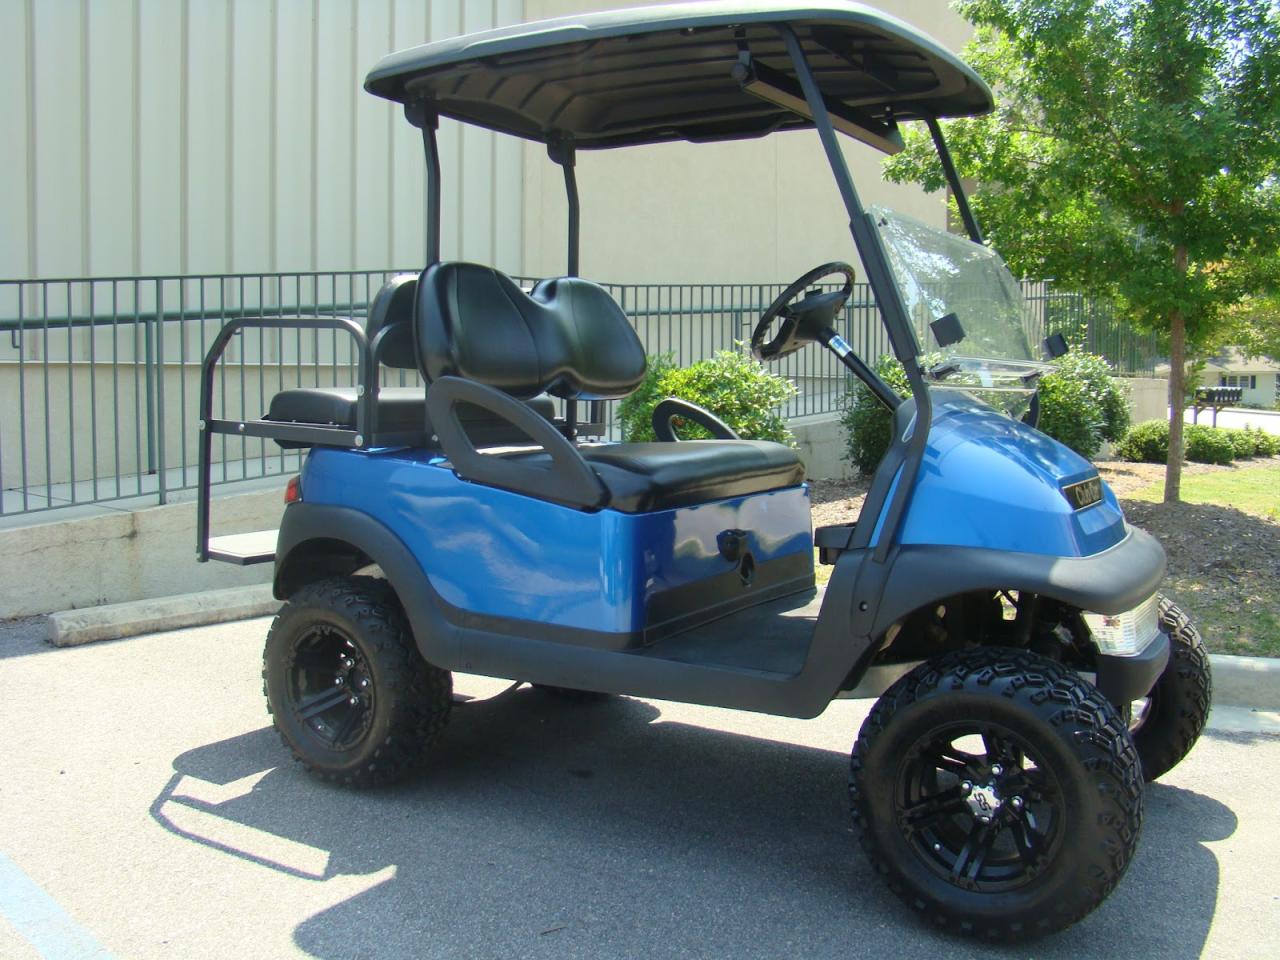 Used Golf Carts for Sale by Owner in Montgomery, Georgia: Find Your Perfect Ride